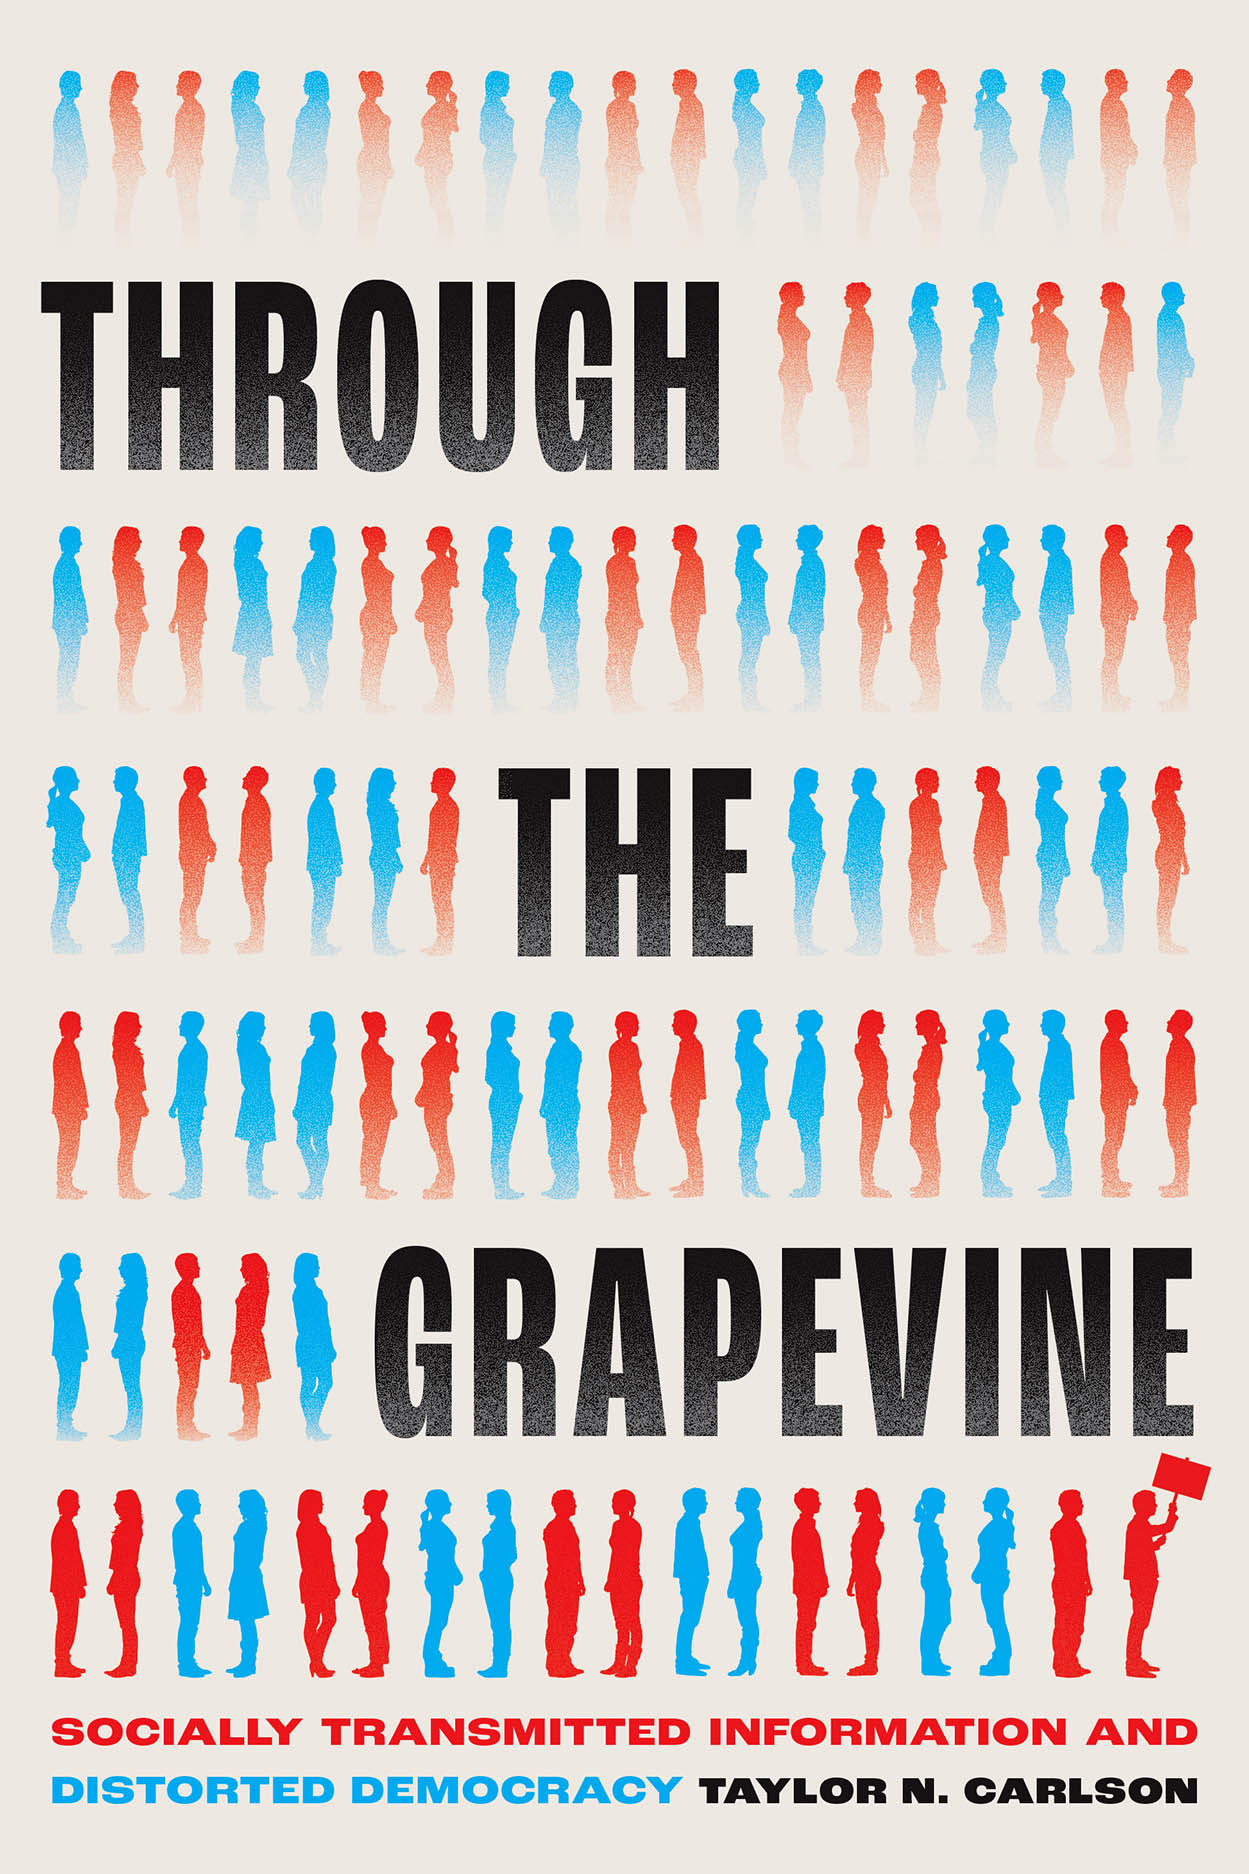 Five Questions with Taylor N. Carlson author of “Through the Grapevine: Socially Transmitted Information and Distorted Democracy”